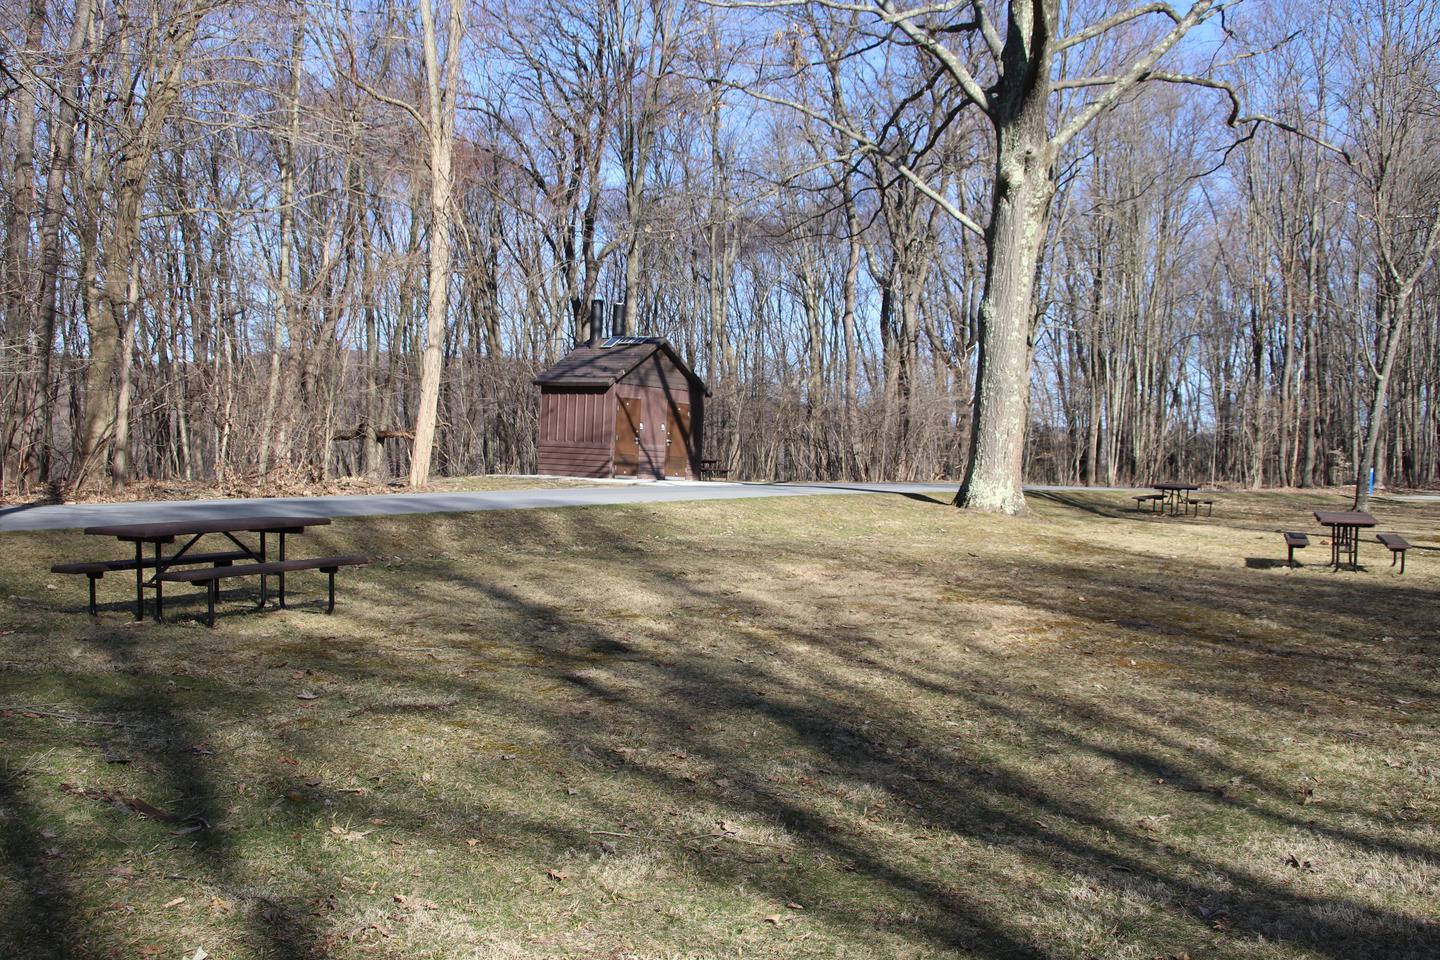 The picnic area at Johnstown Flood National Memorial